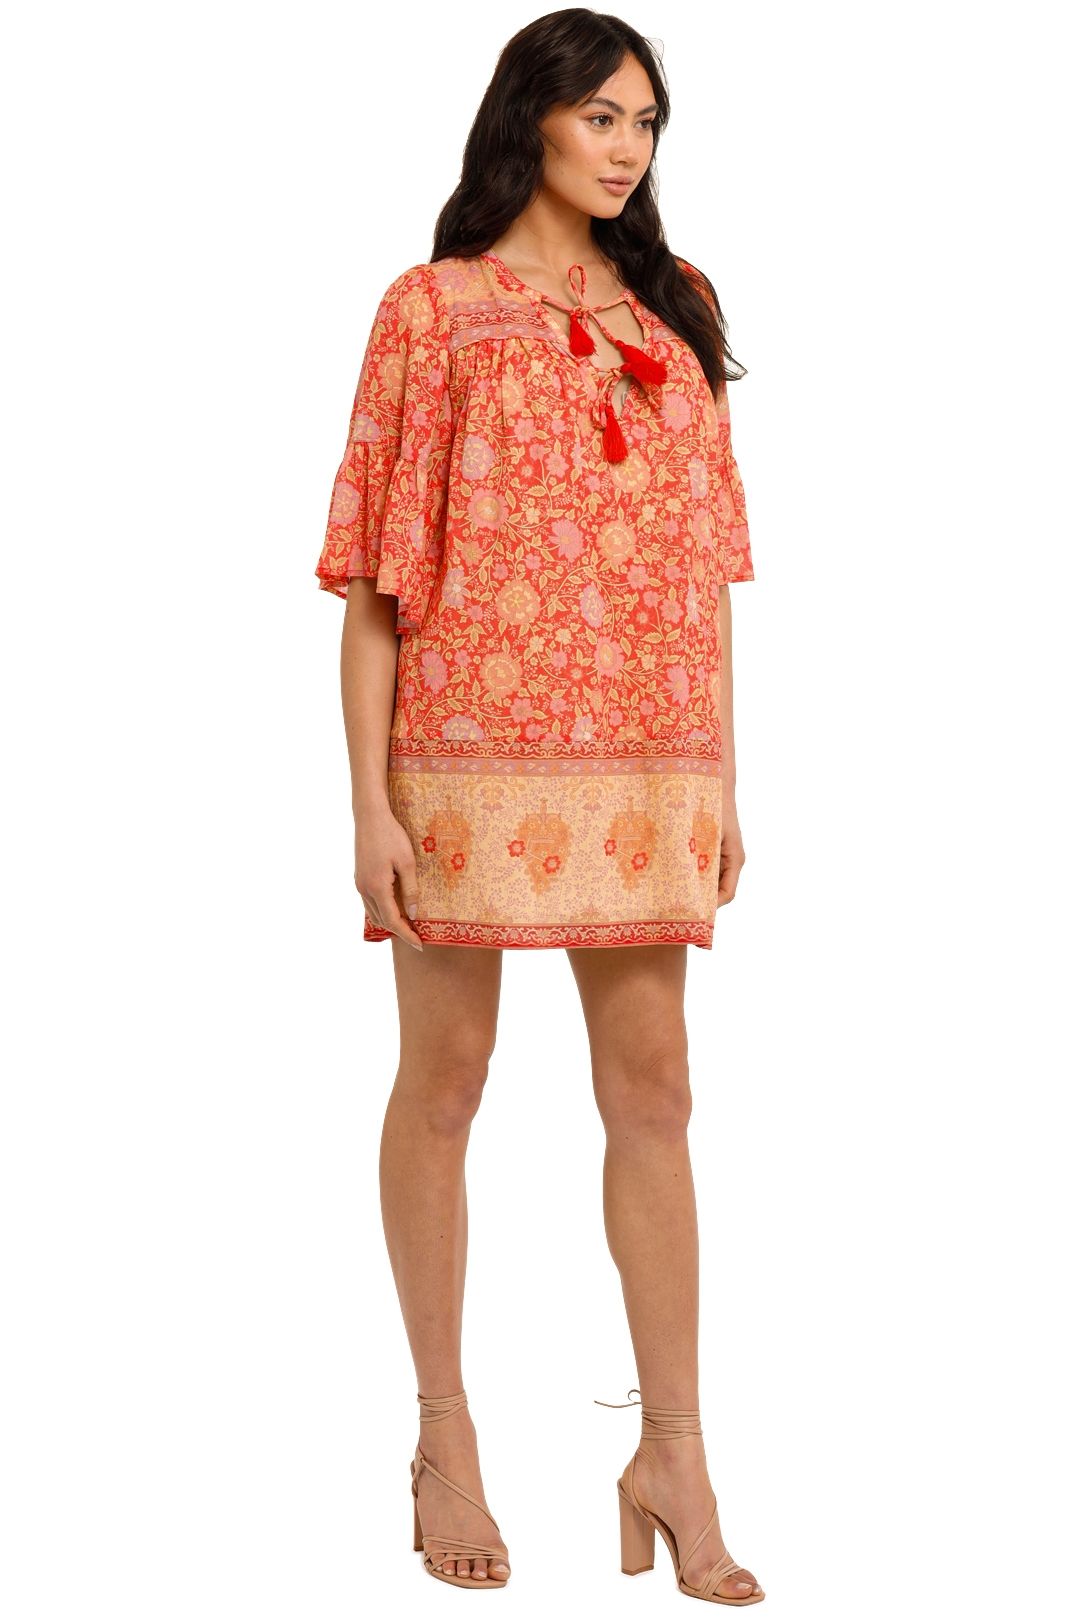 Spell Love Story Flutter Tunic Red Coral Floral